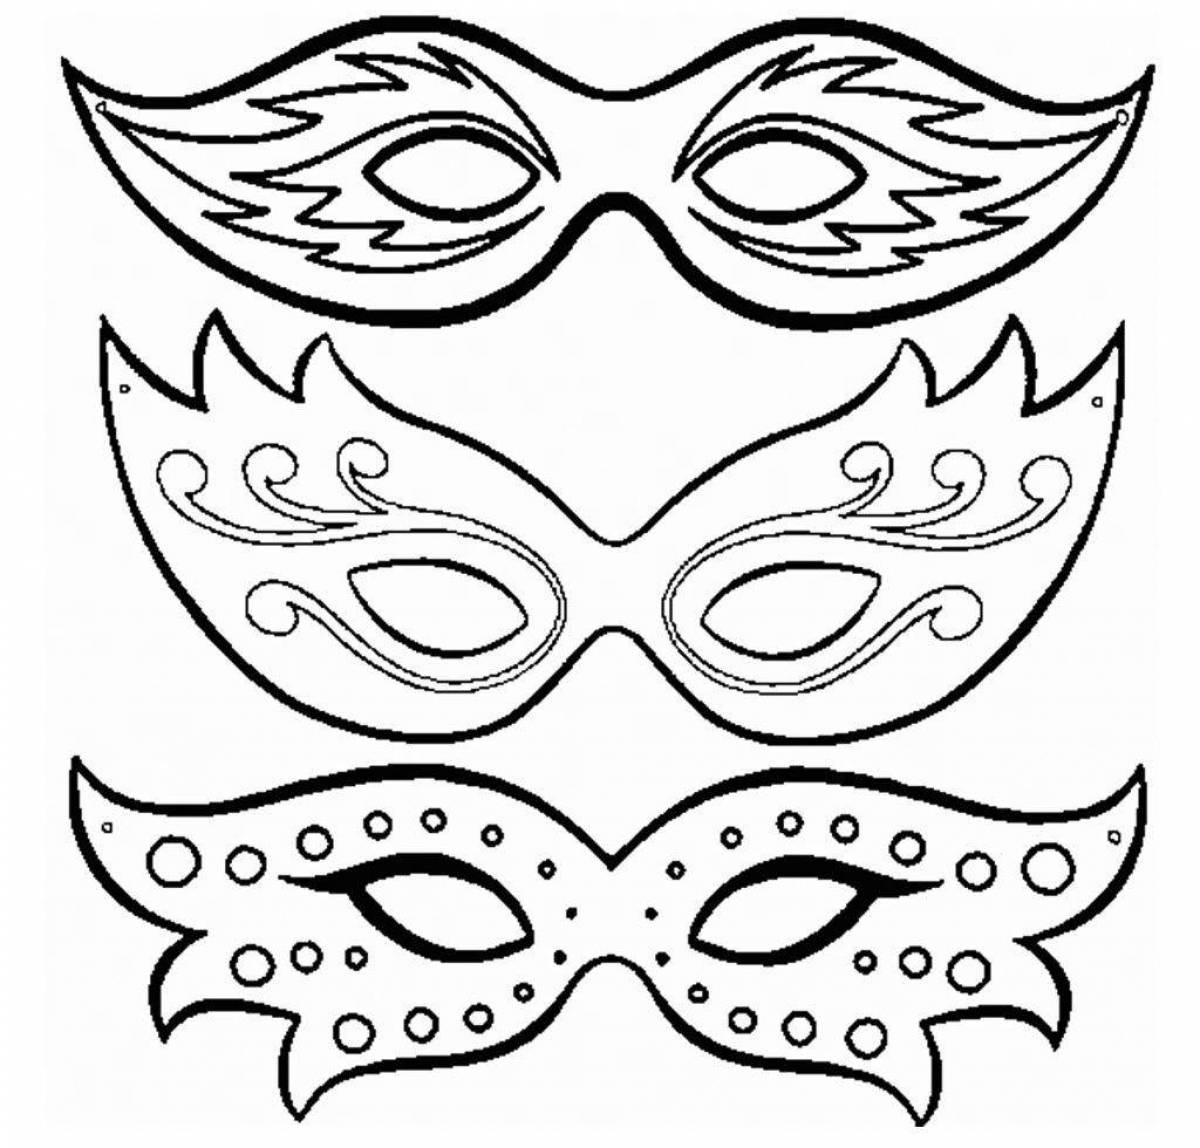 Coloring page fascinating carnival mask